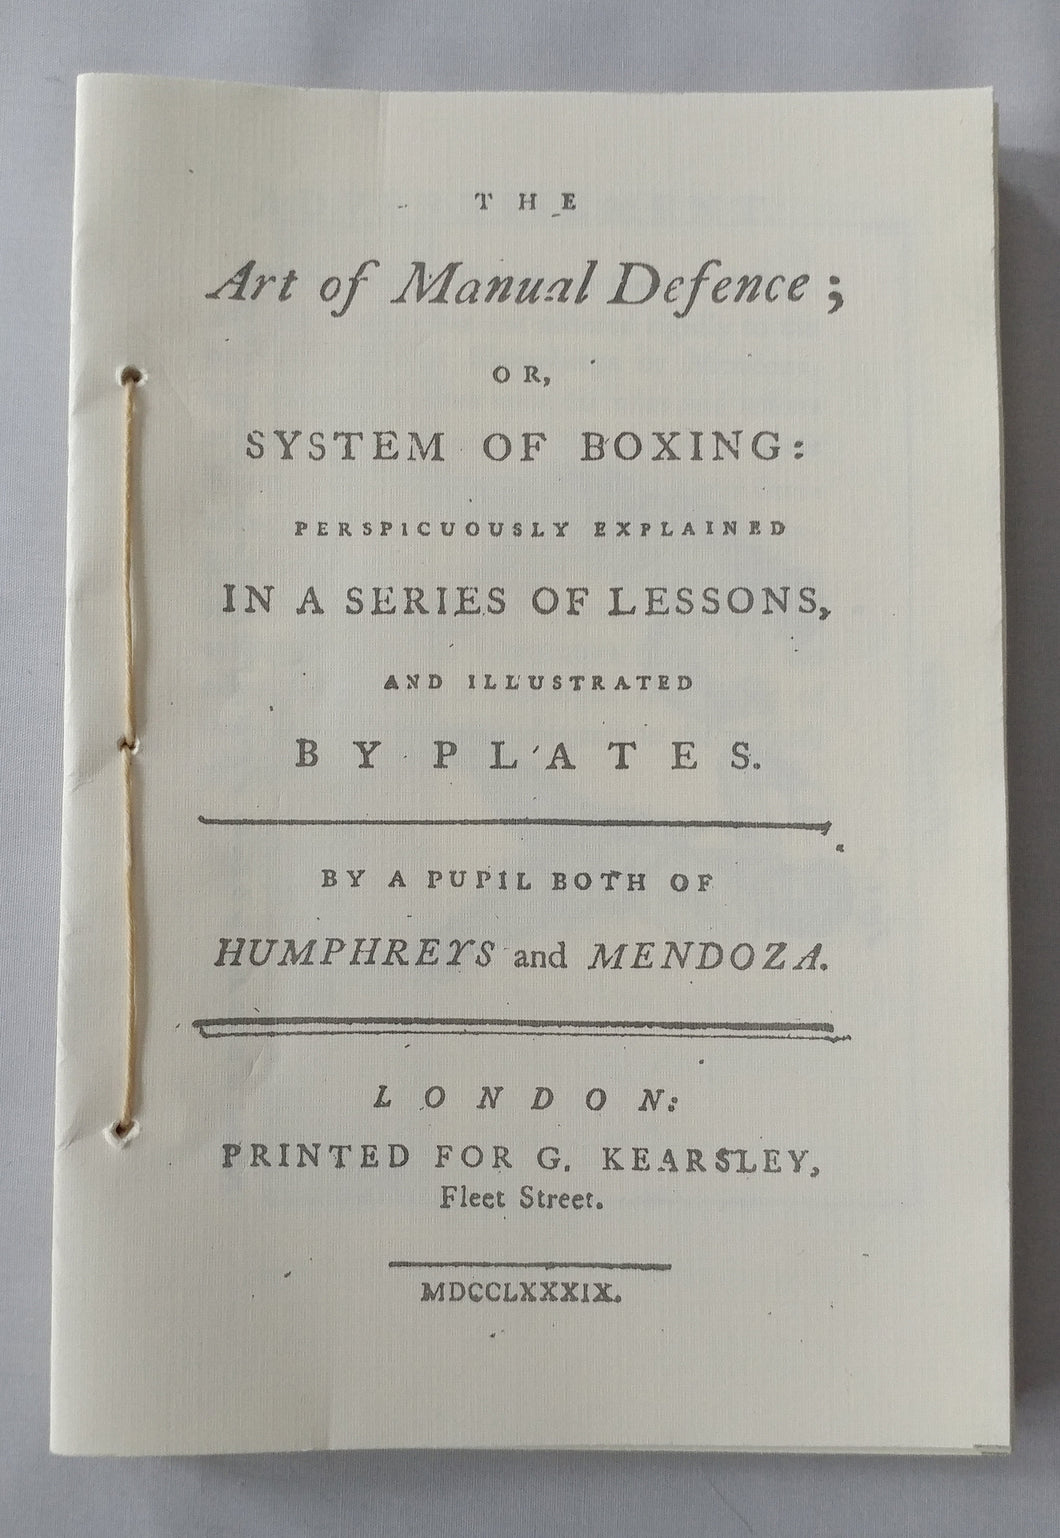 The Art of Manual Defense or System of Boxing